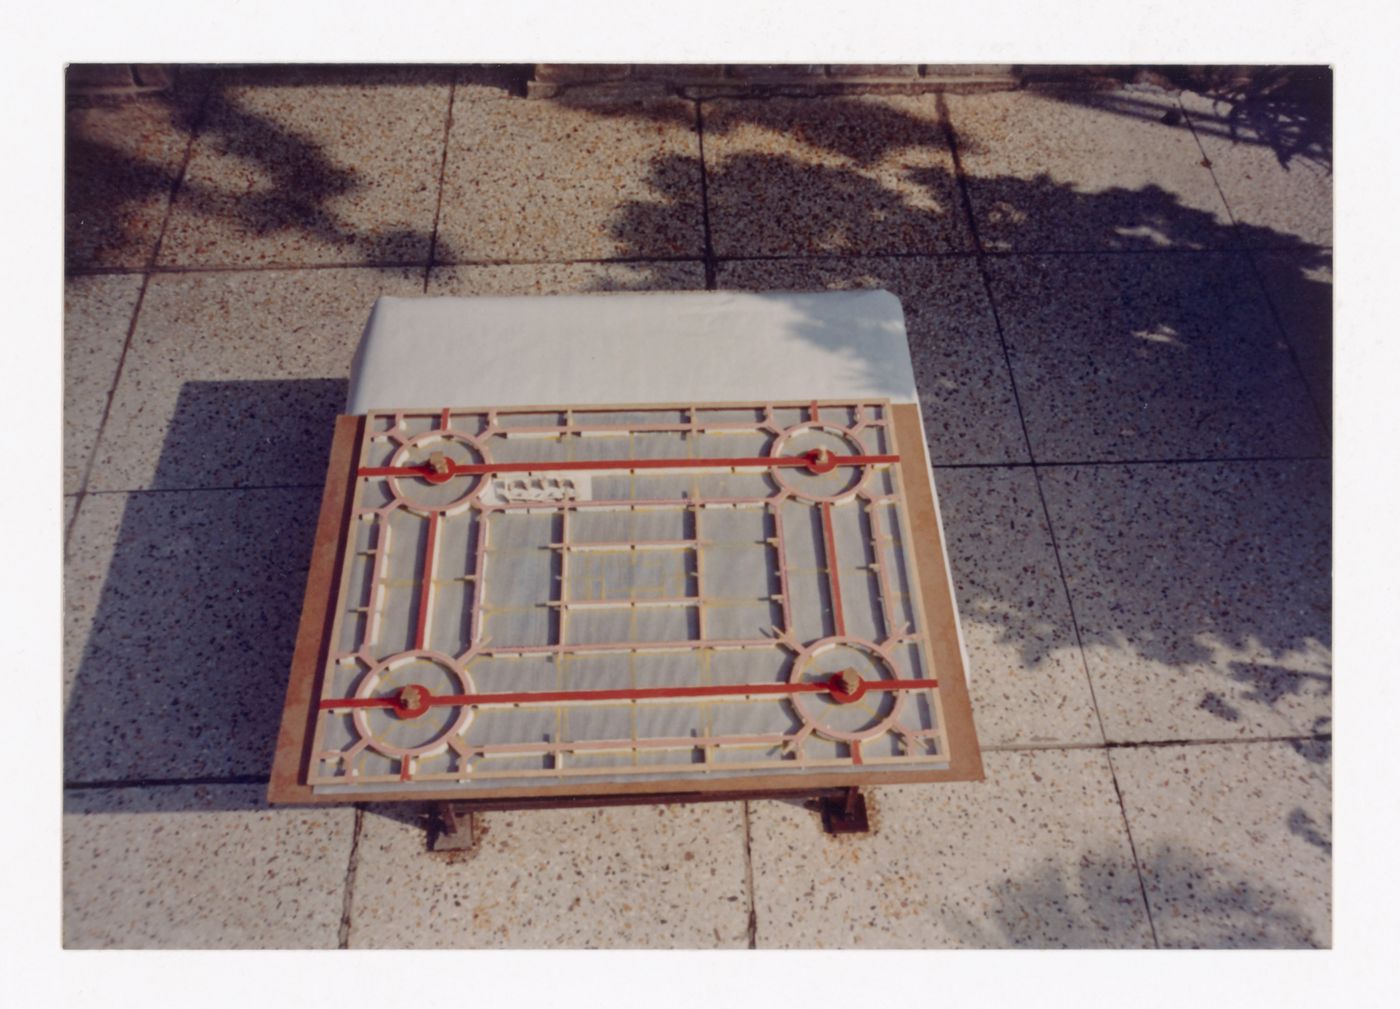 Photograph of model for Linear city, Chandigarh, India